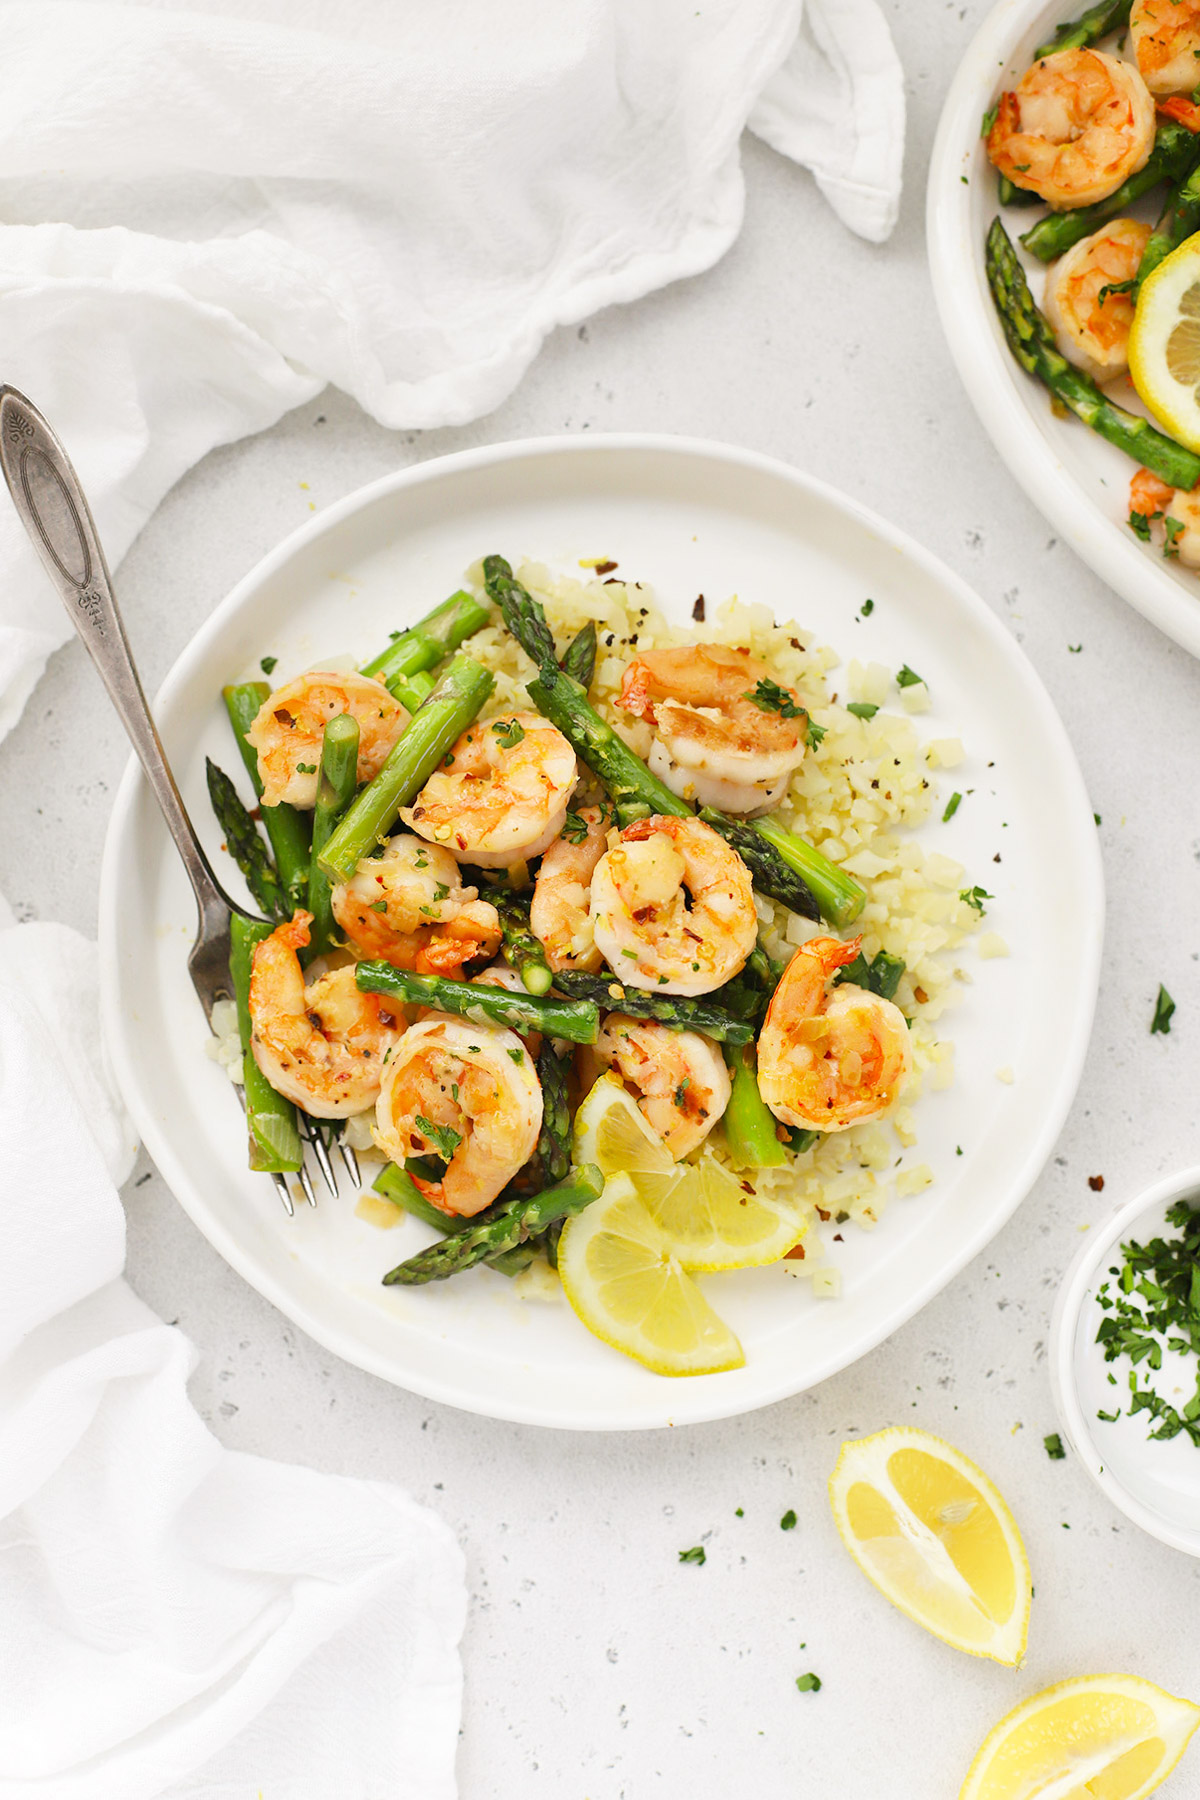 Overhead view of a plate of lemon shrimp and asparagus with cauliflower rice